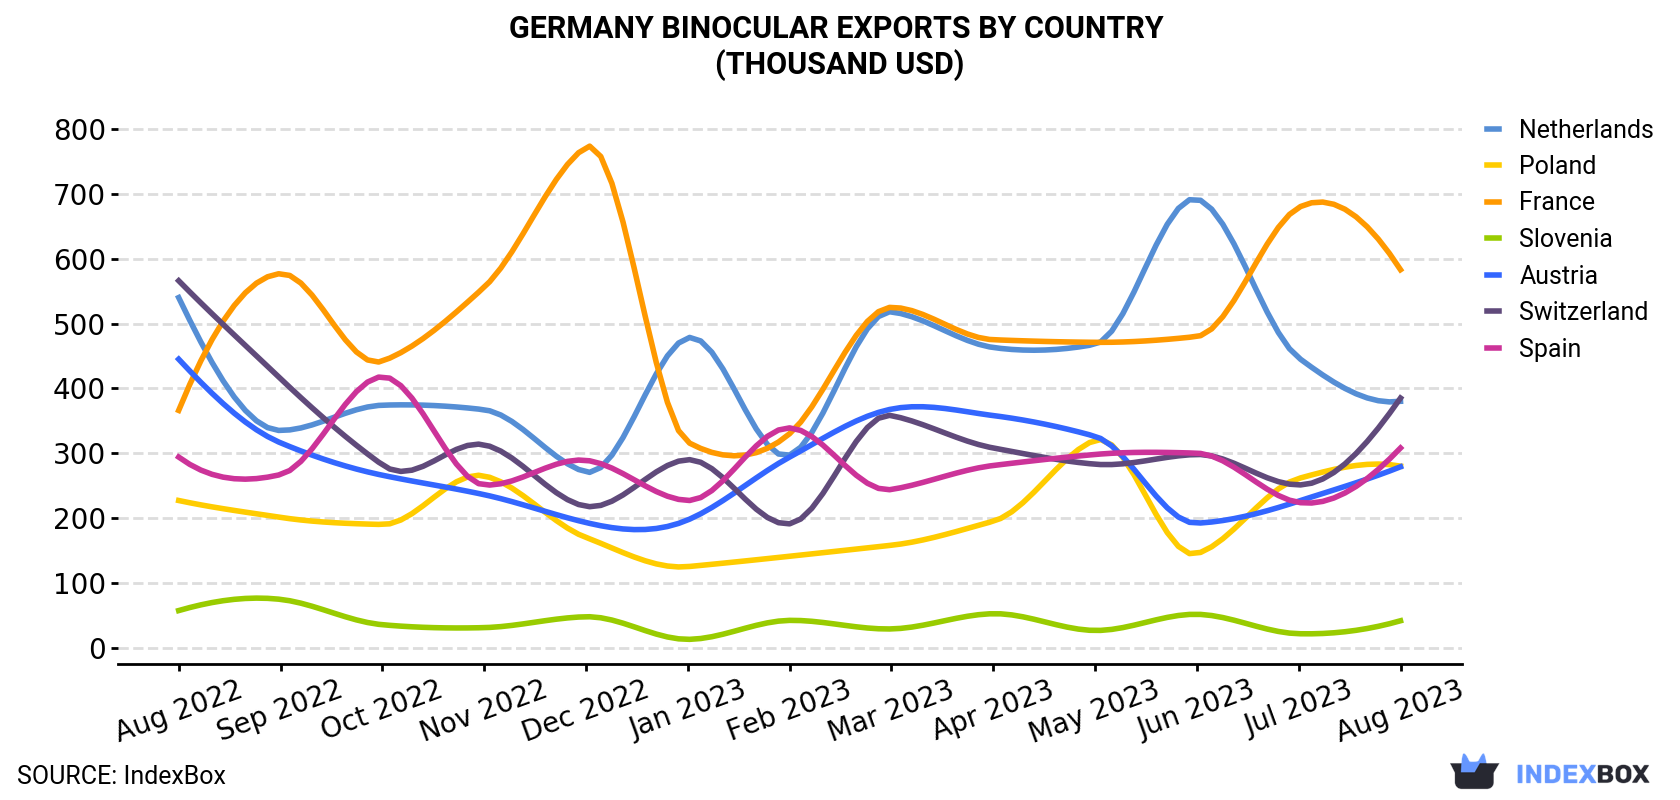 Germany Binocular Exports By Country (Thousand USD)